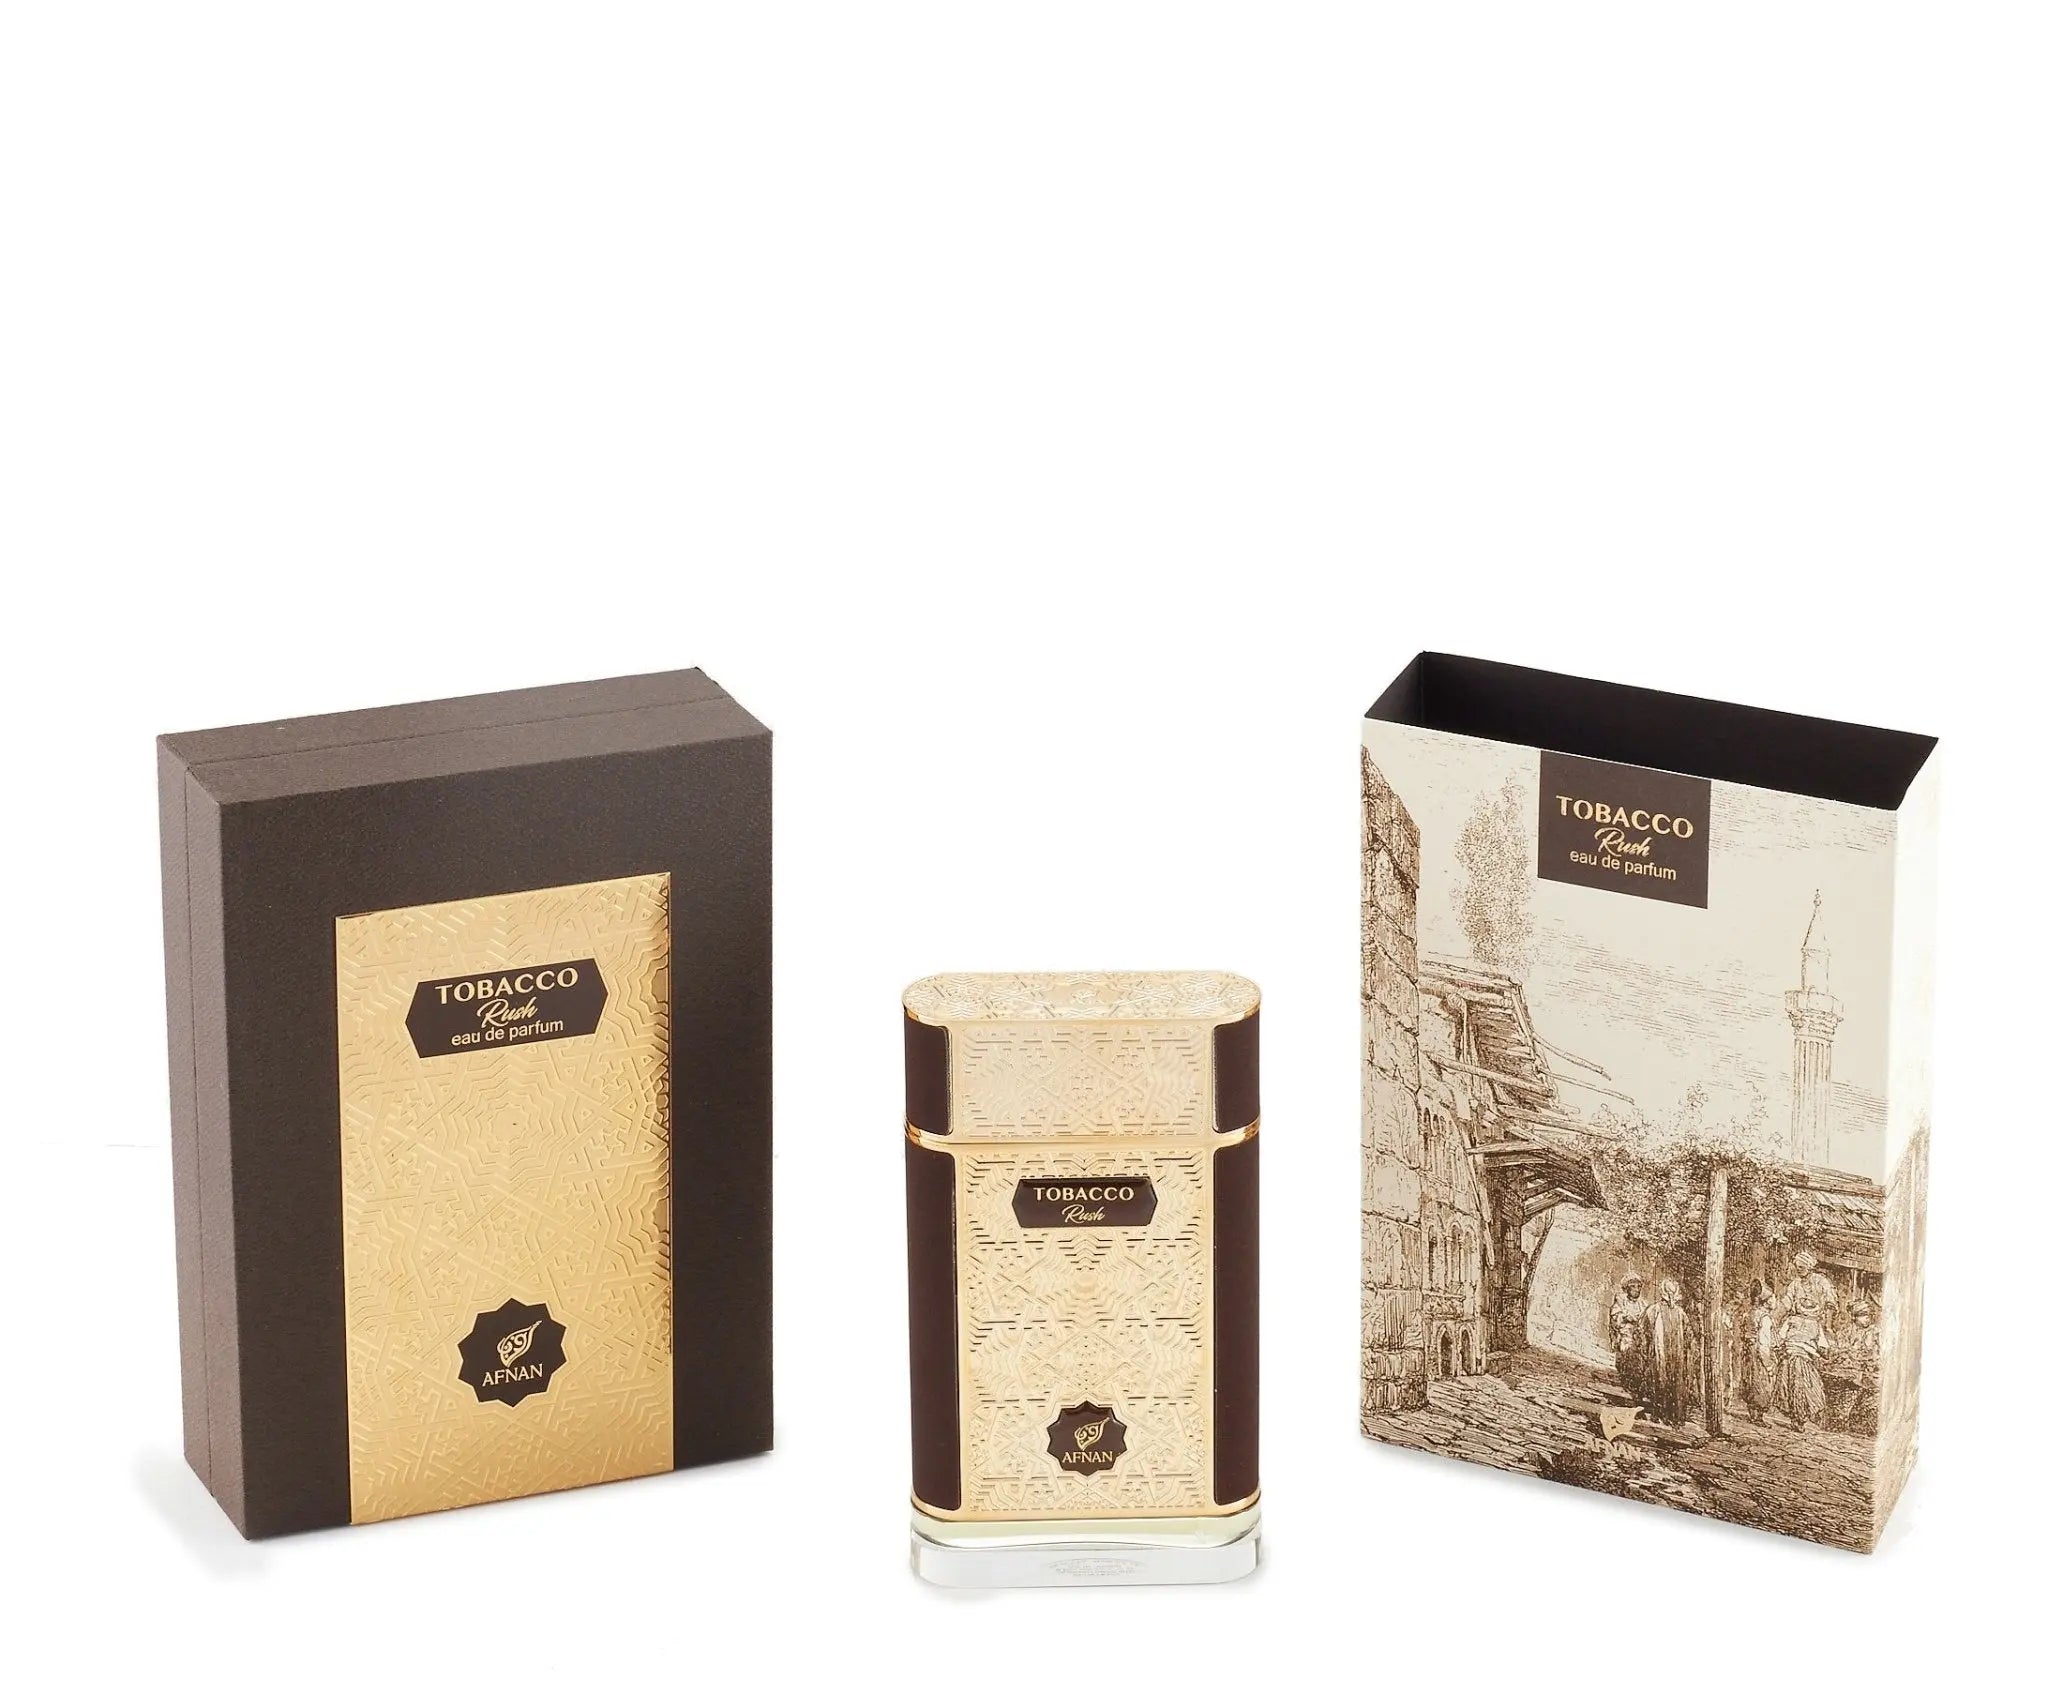 The image features the "Tobacco Rush" perfume by Afnan Perfumes. There is a box and a perfume bottle. On the left, a dark brown box with a textured golden panel reads "TOBACCO" and "Afnan" with the product description "eau de parfum." The central bottle mirrors the design of the left box. To the right, there's a taller, cream-colored box sleeve adorned with a detailed, vintage-style illustration of an old cityscape.